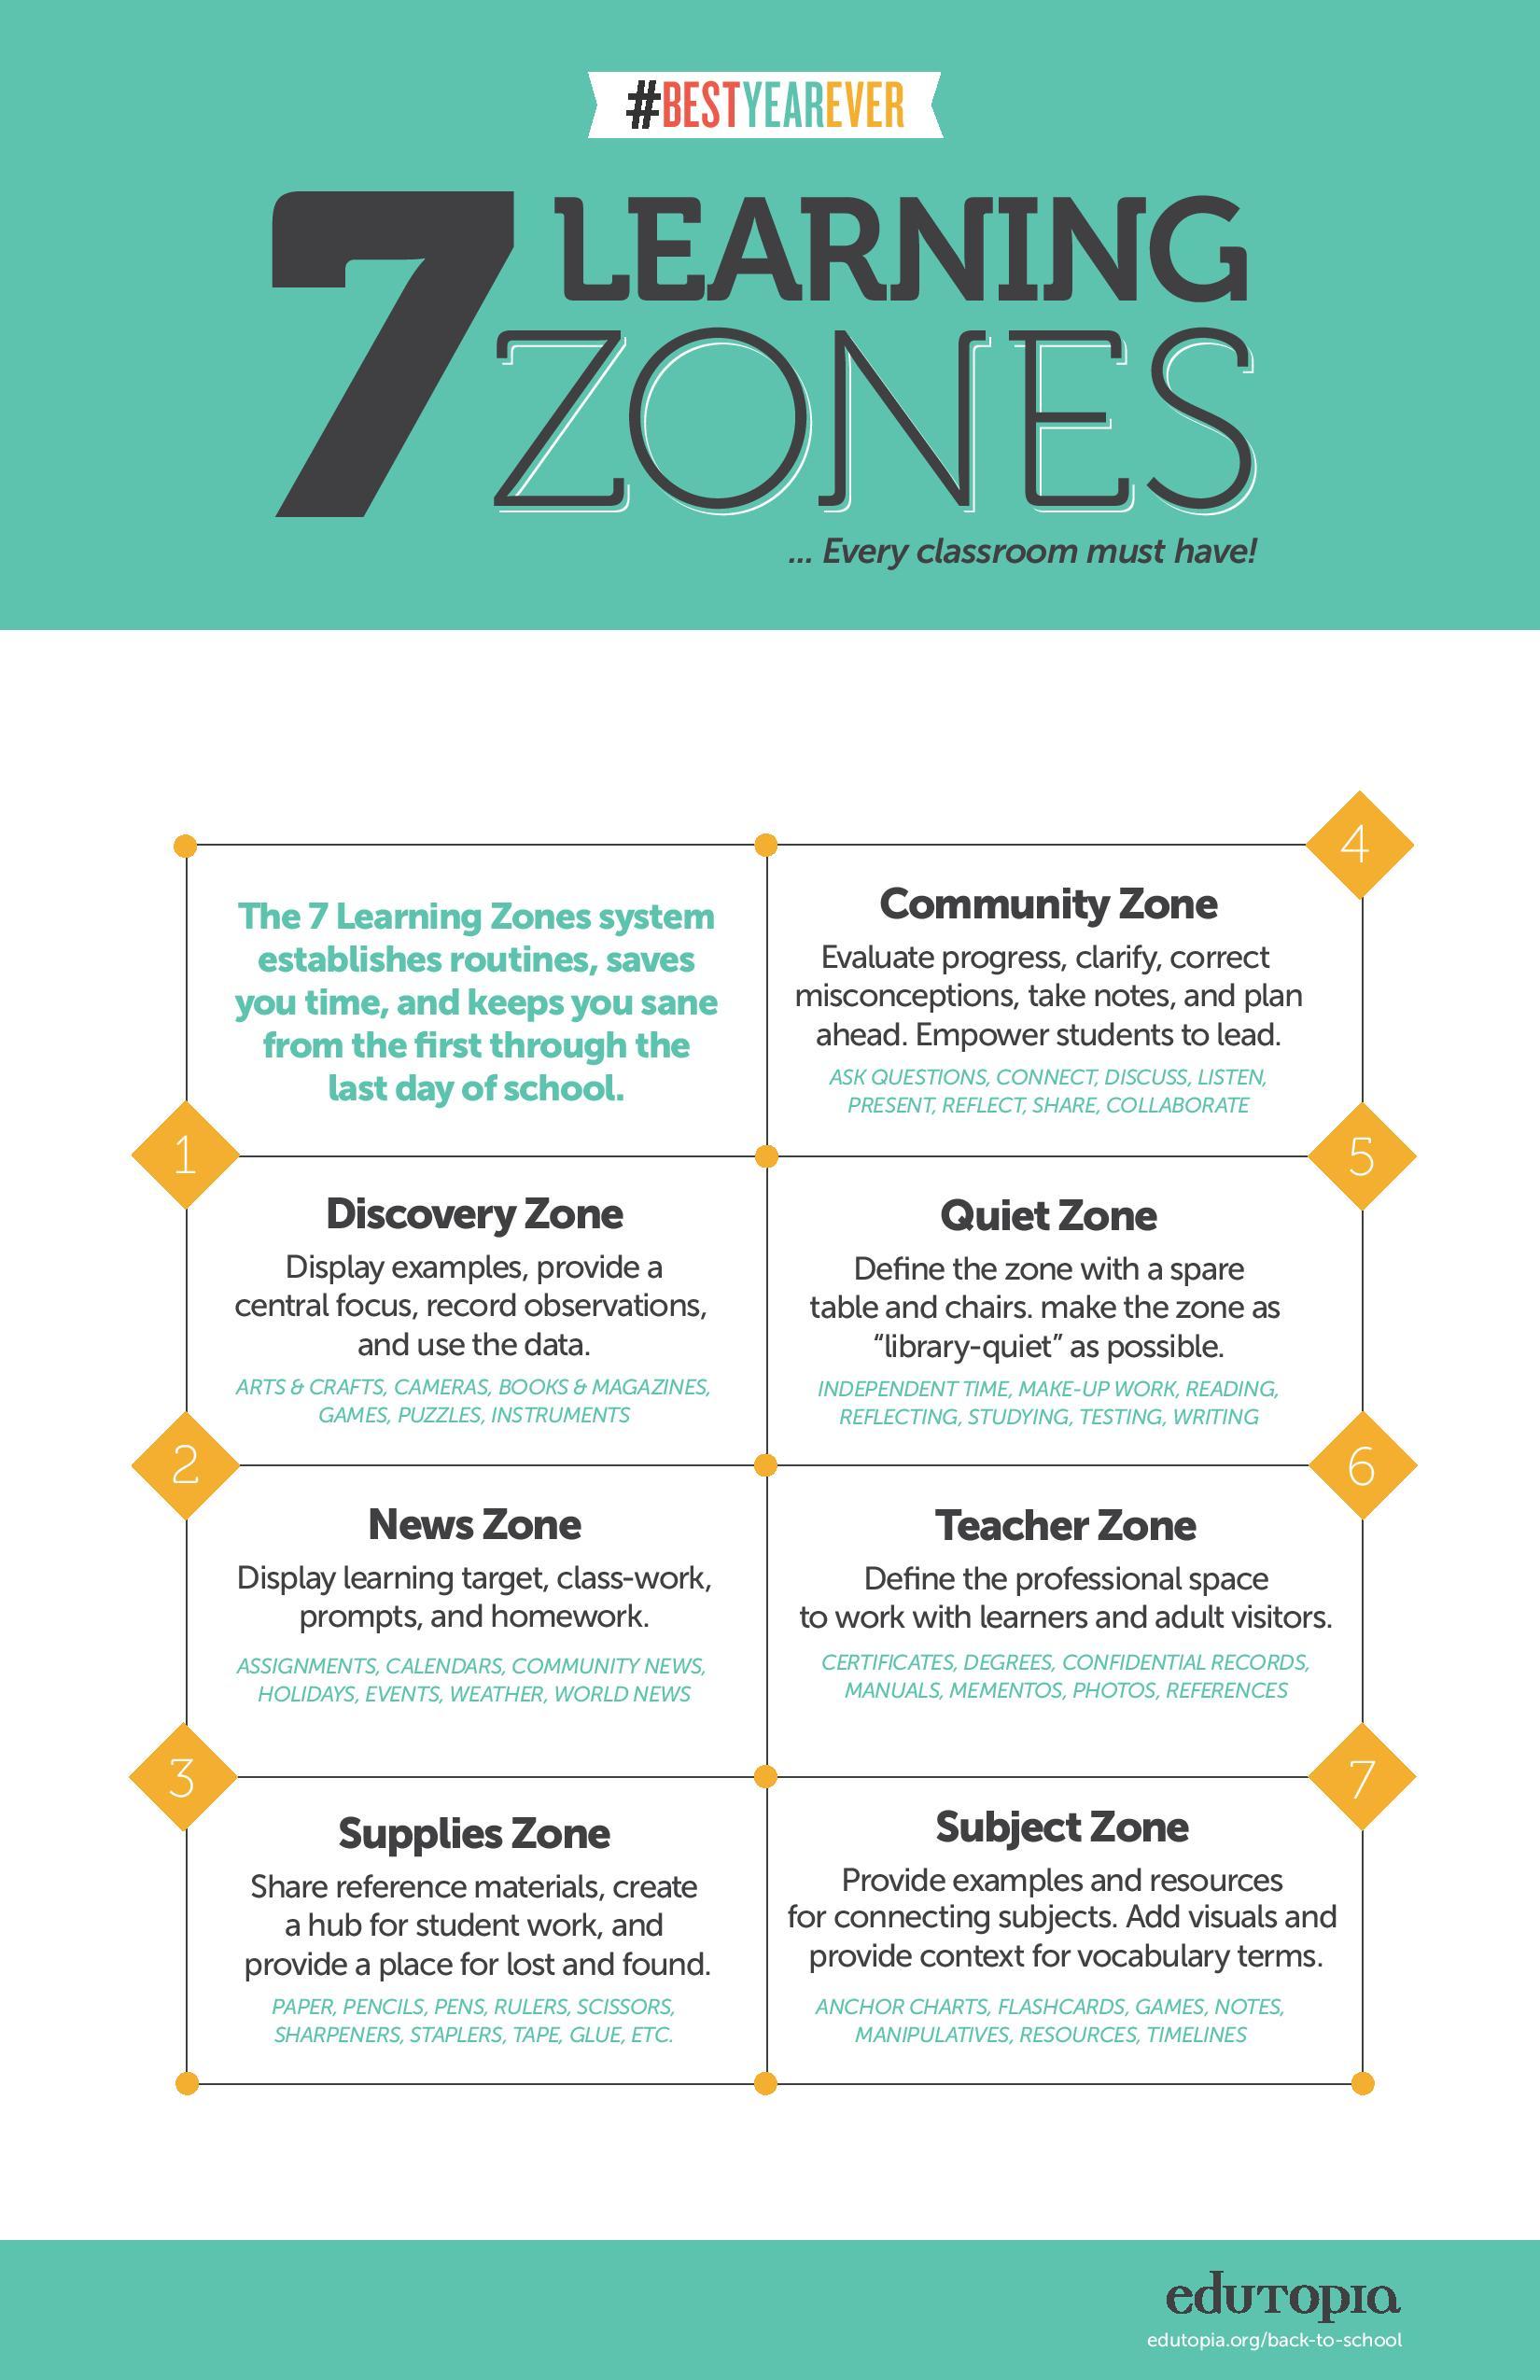 The Learning Zones of a Classroom Infographic